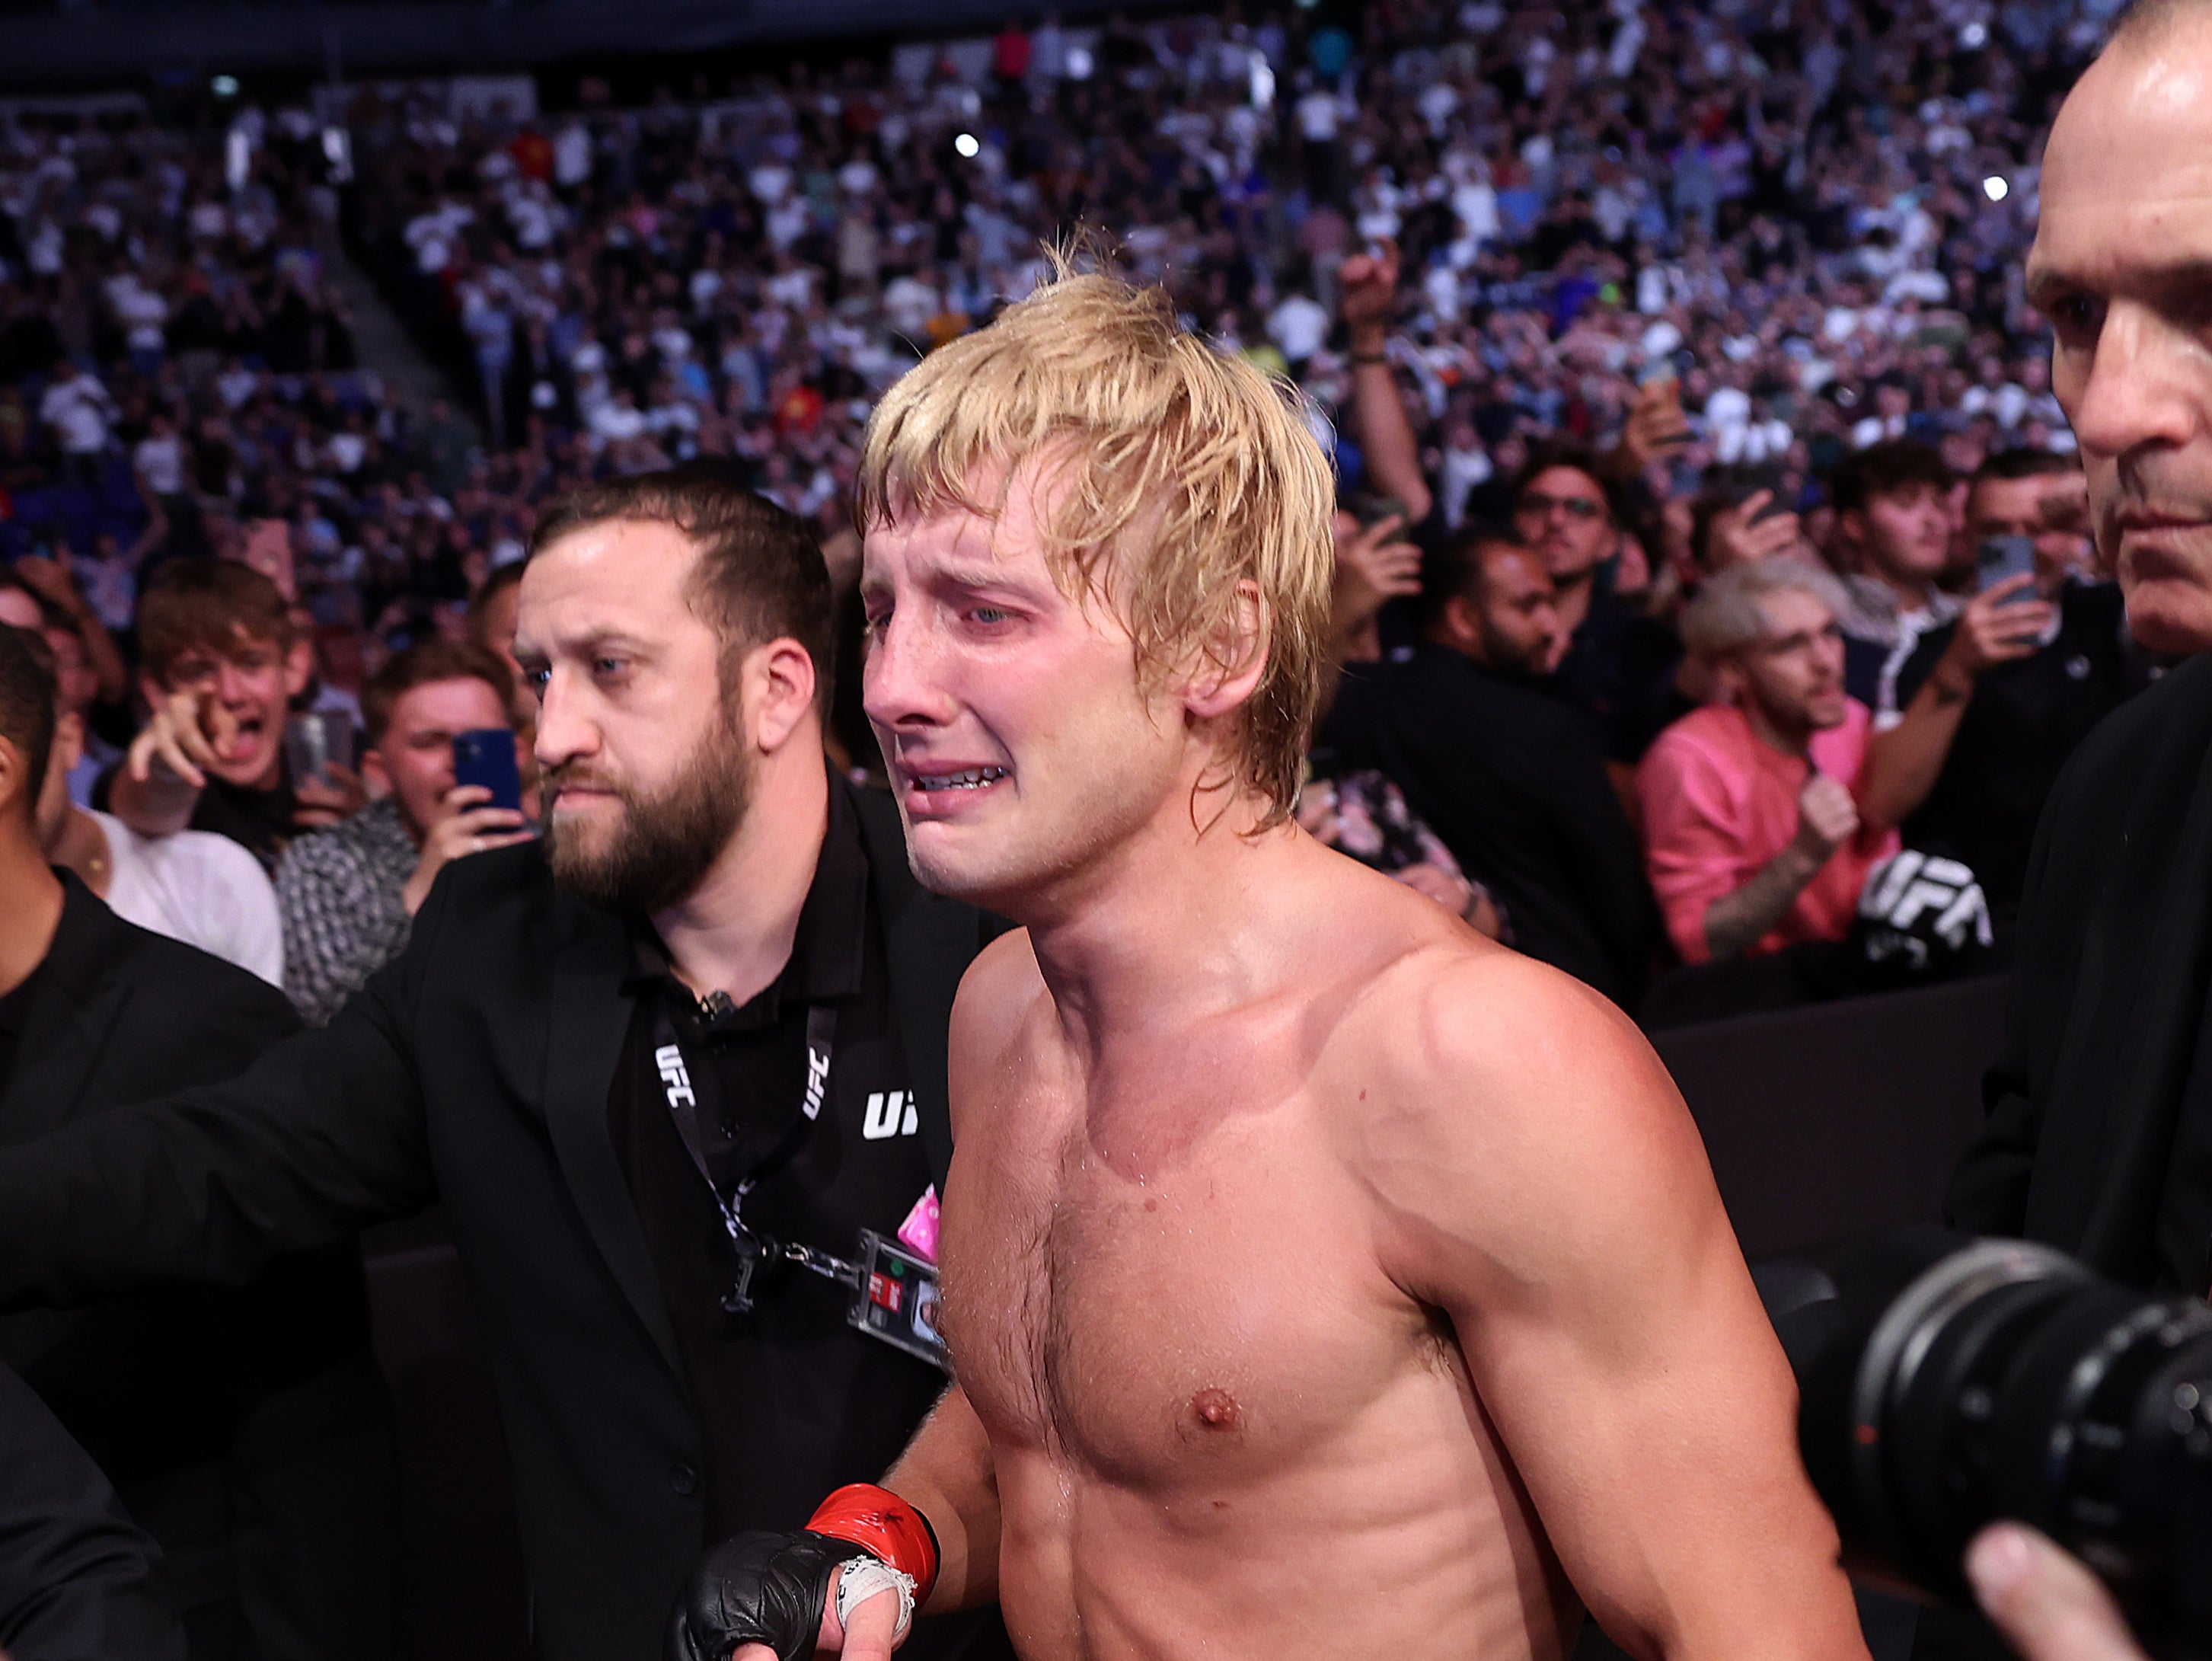 Paddy Pimblett after speaking about men’s mental health at UFC London